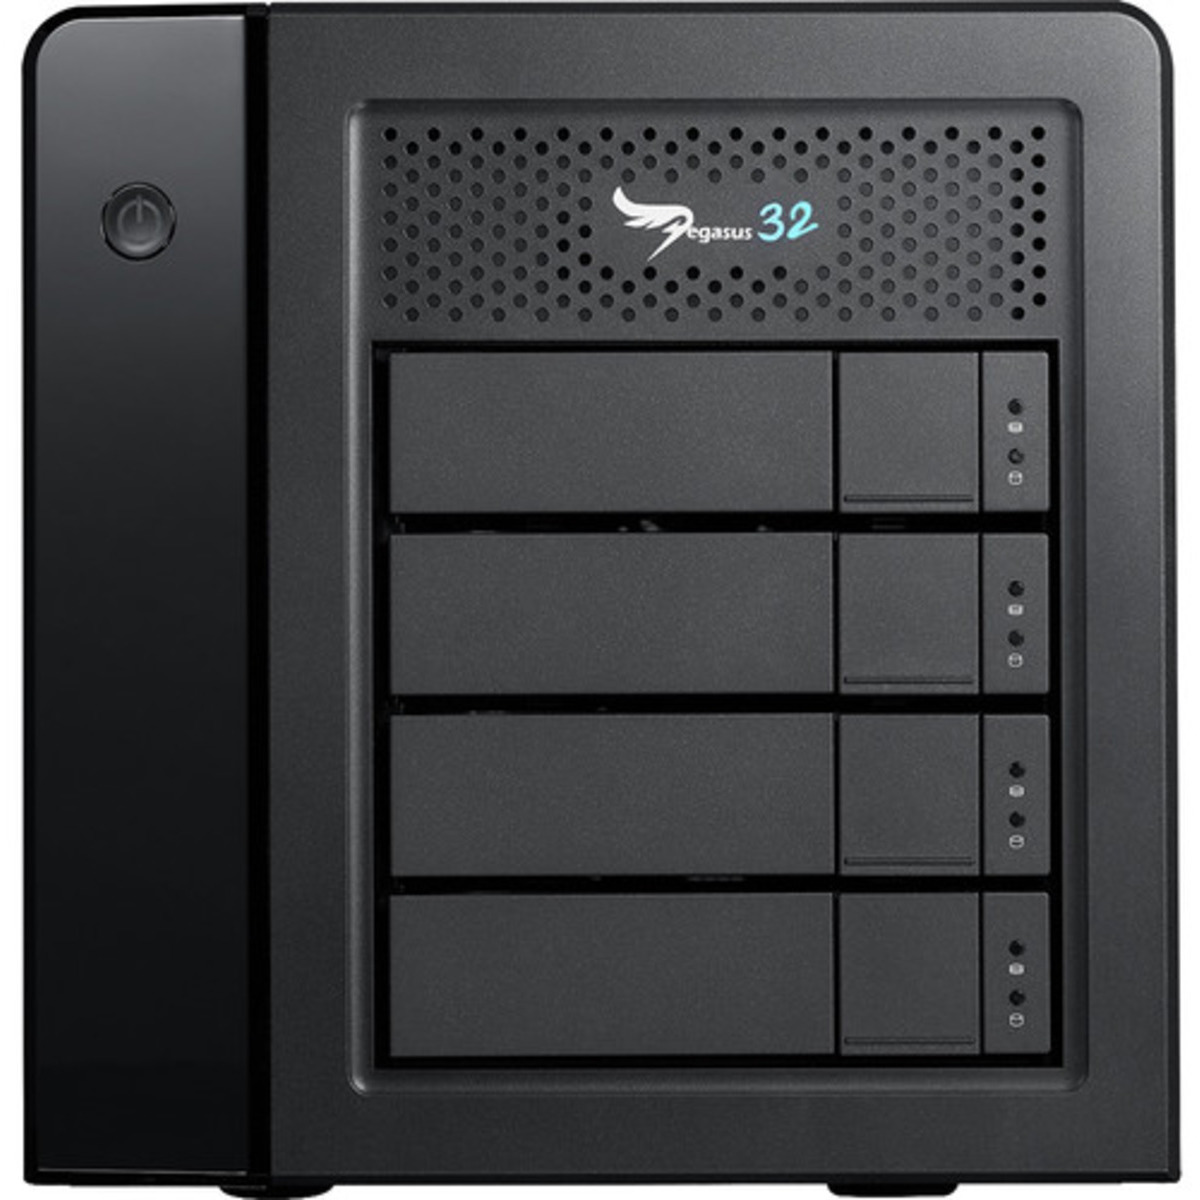 Promise Technology Pegasus32 R4 Thunderbolt 3 12tb 4-Bay Desktop Multimedia / Power User / Business DAS - Direct Attached Storage Device 2x6tb Seagate BarraCuda ST6000DM003 3.5 5400rpm SATA 6Gb/s HDD CONSUMER Class Drives Installed - Burn-In Tested Pegasus32 R4 Thunderbolt 3